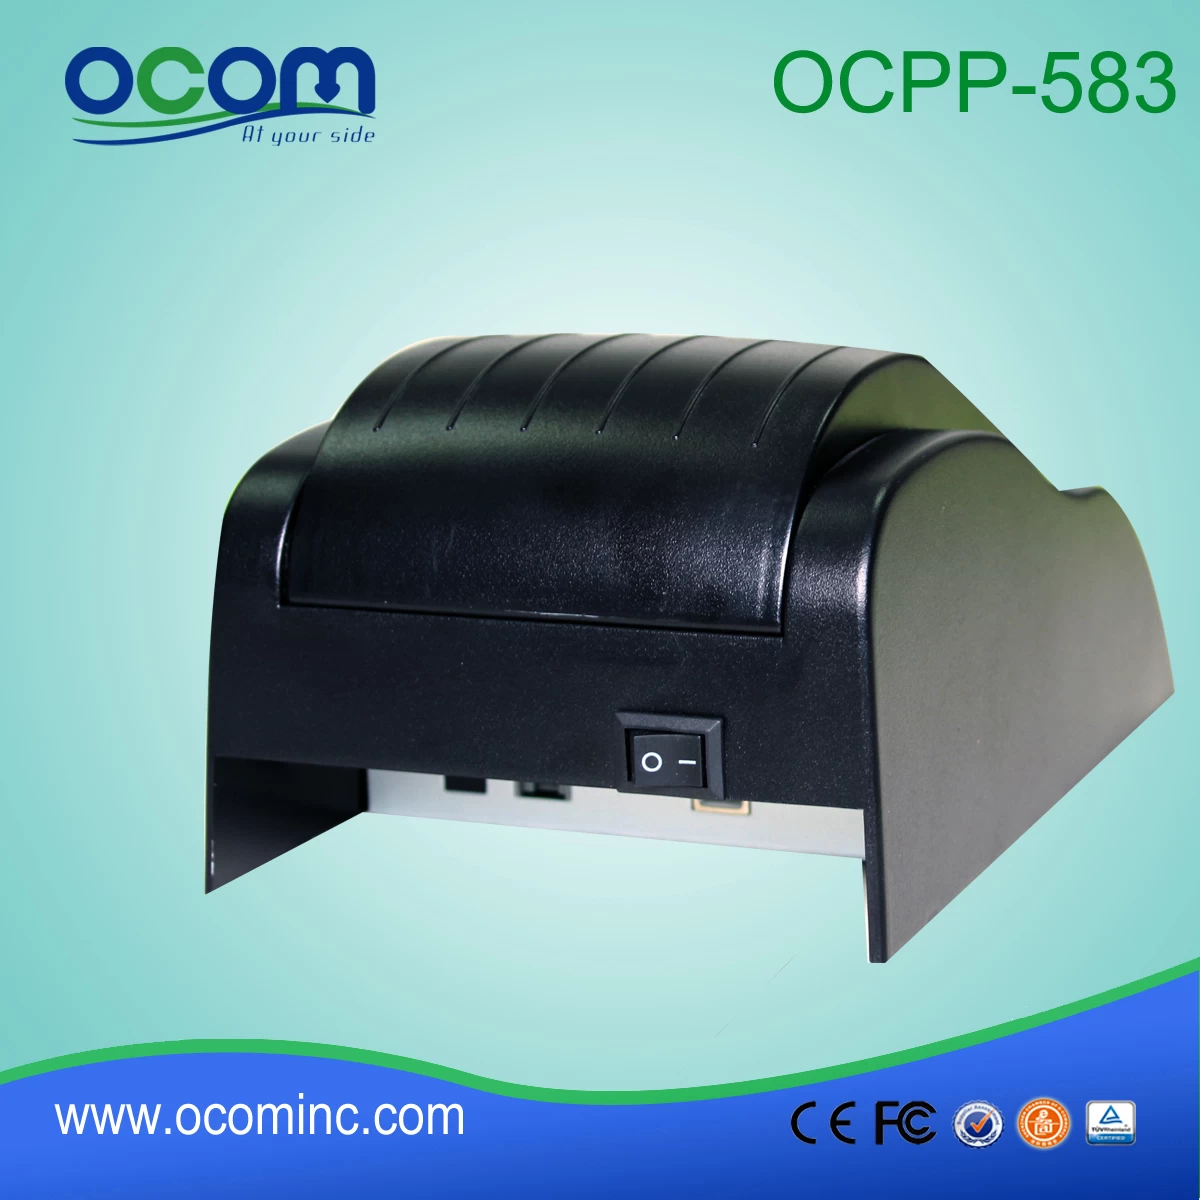 Low cost small POS thermal receipt printer-OCPP-583